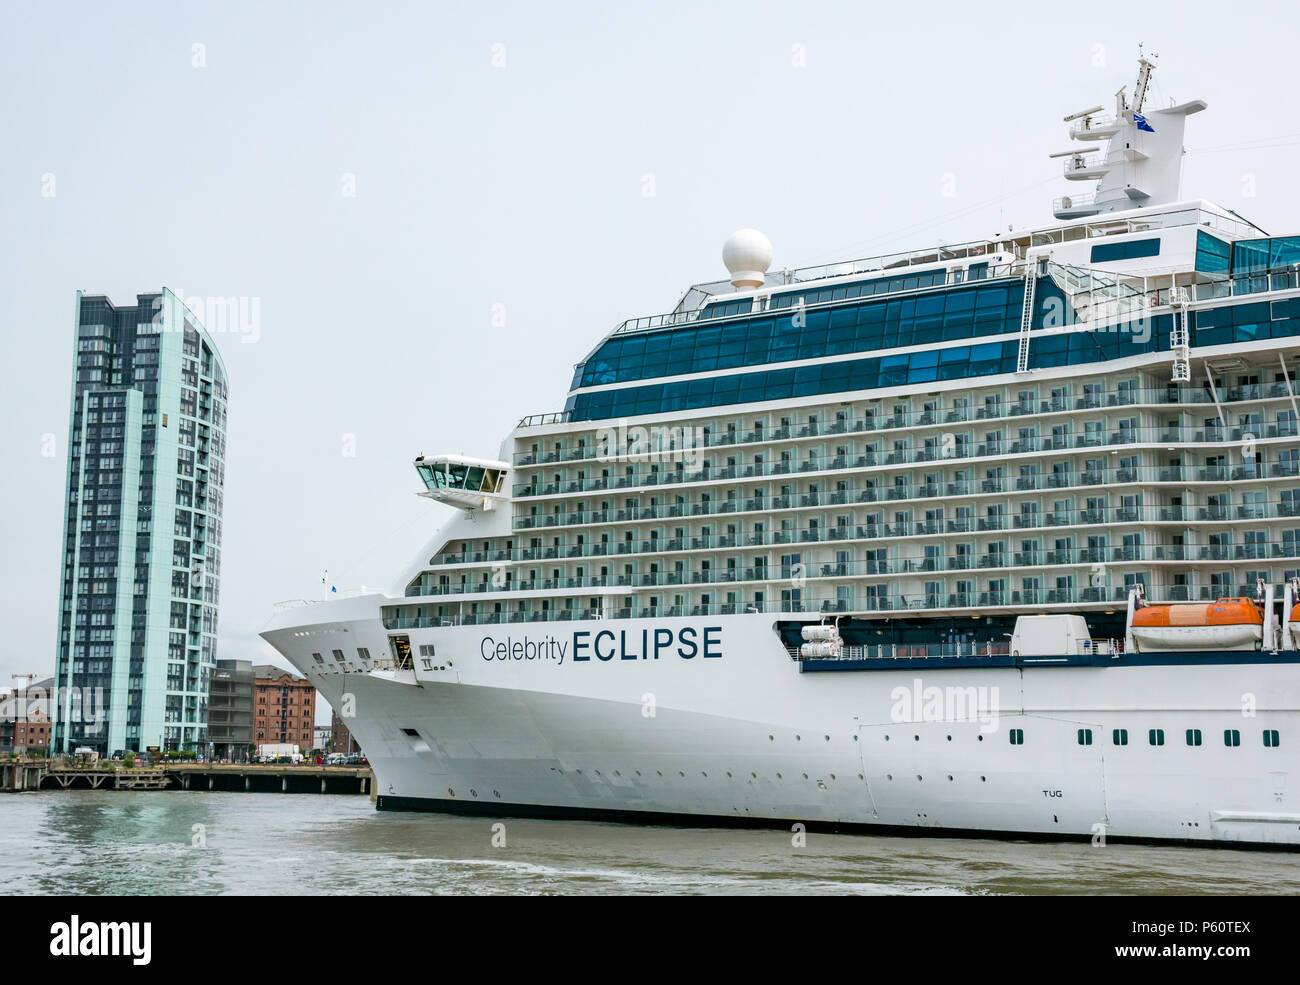 Celebrity Eclipse, Solstice-class cruise ship, operated by Celebrity Cruises, docked in Liverpool harbour, River Mersey, England, UK Stock Photo